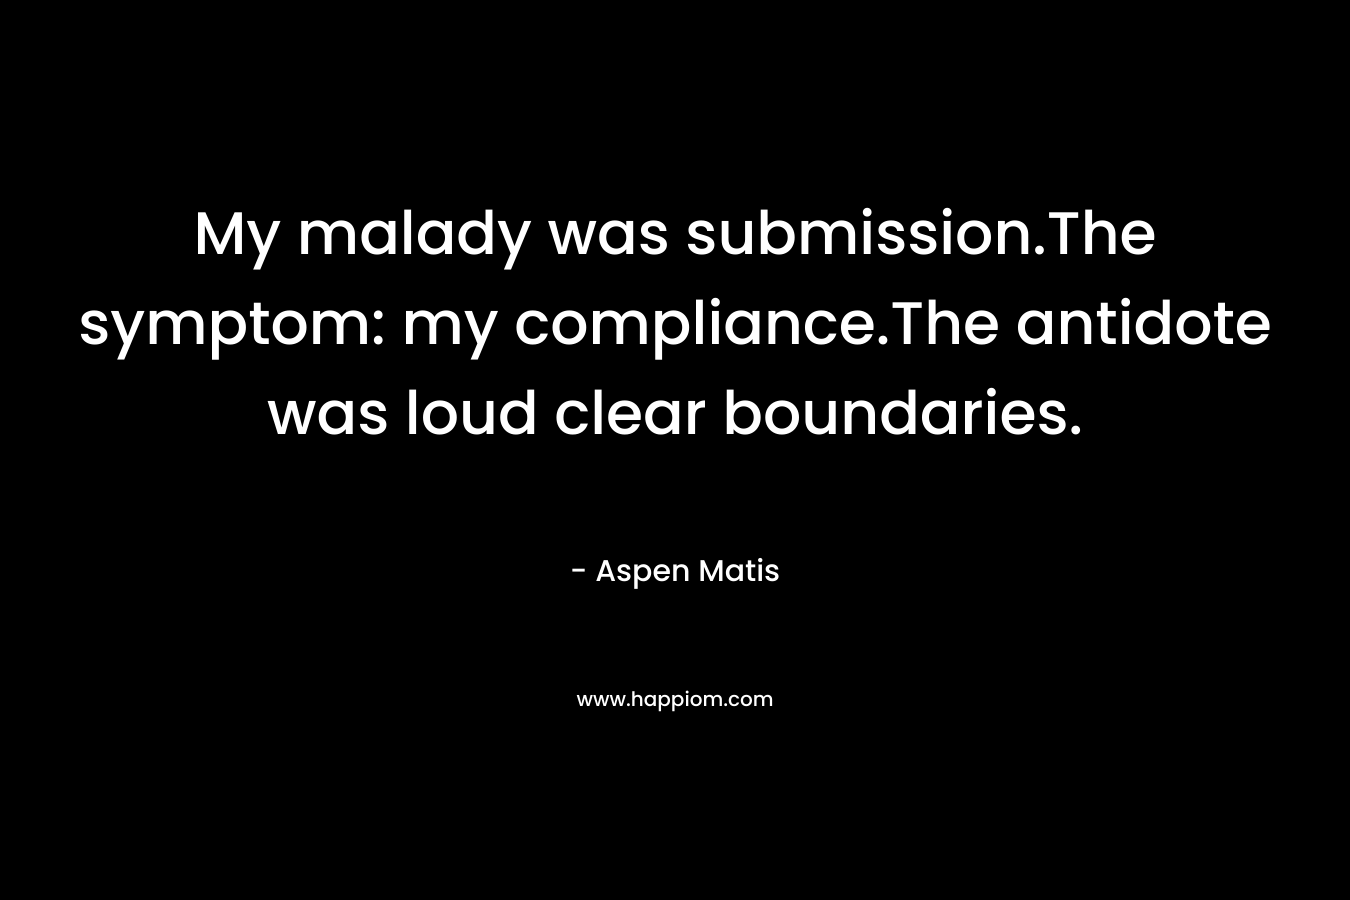 My malady was submission.The symptom: my compliance.The antidote was loud clear boundaries.